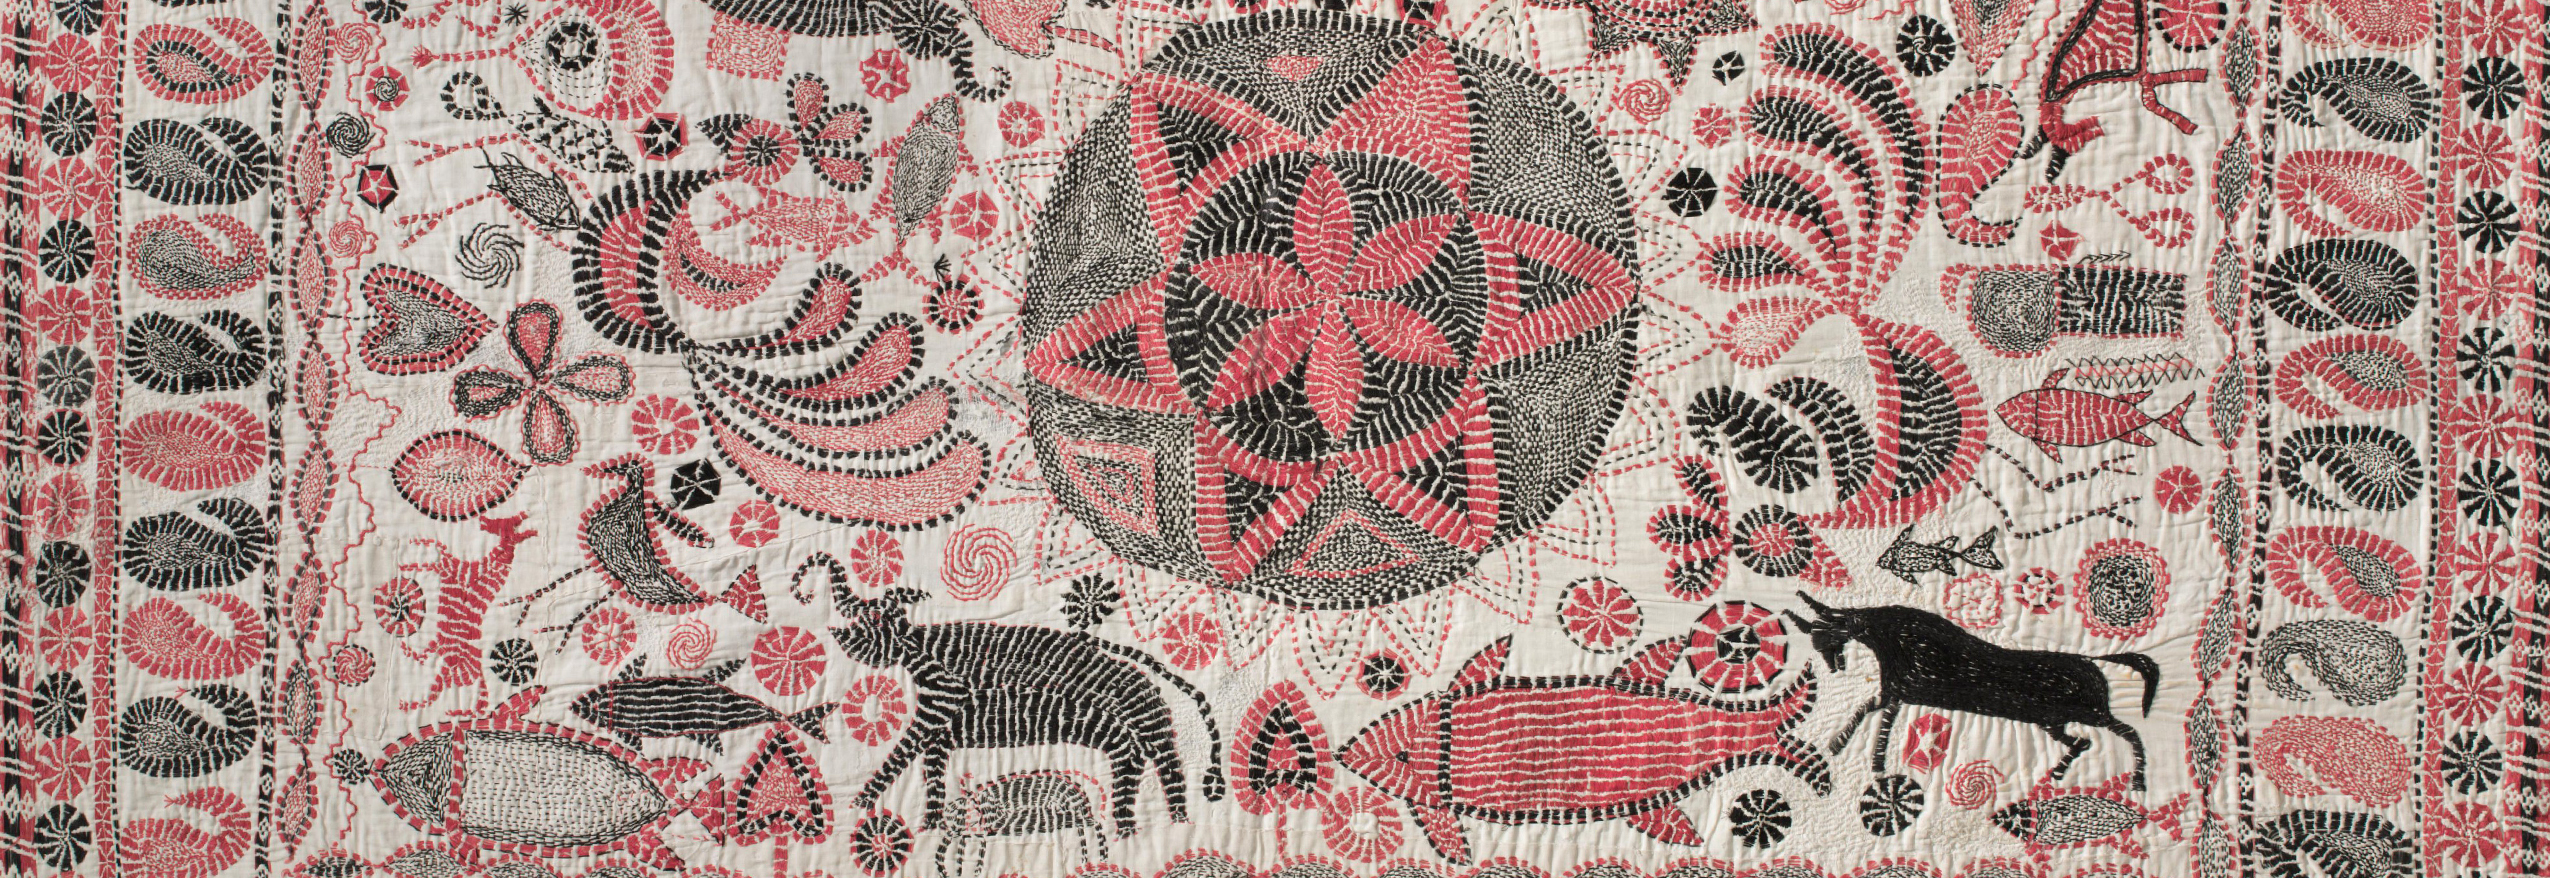 Through the Eye of the Needle: Embroidery and Appliqué in the Subcontinent